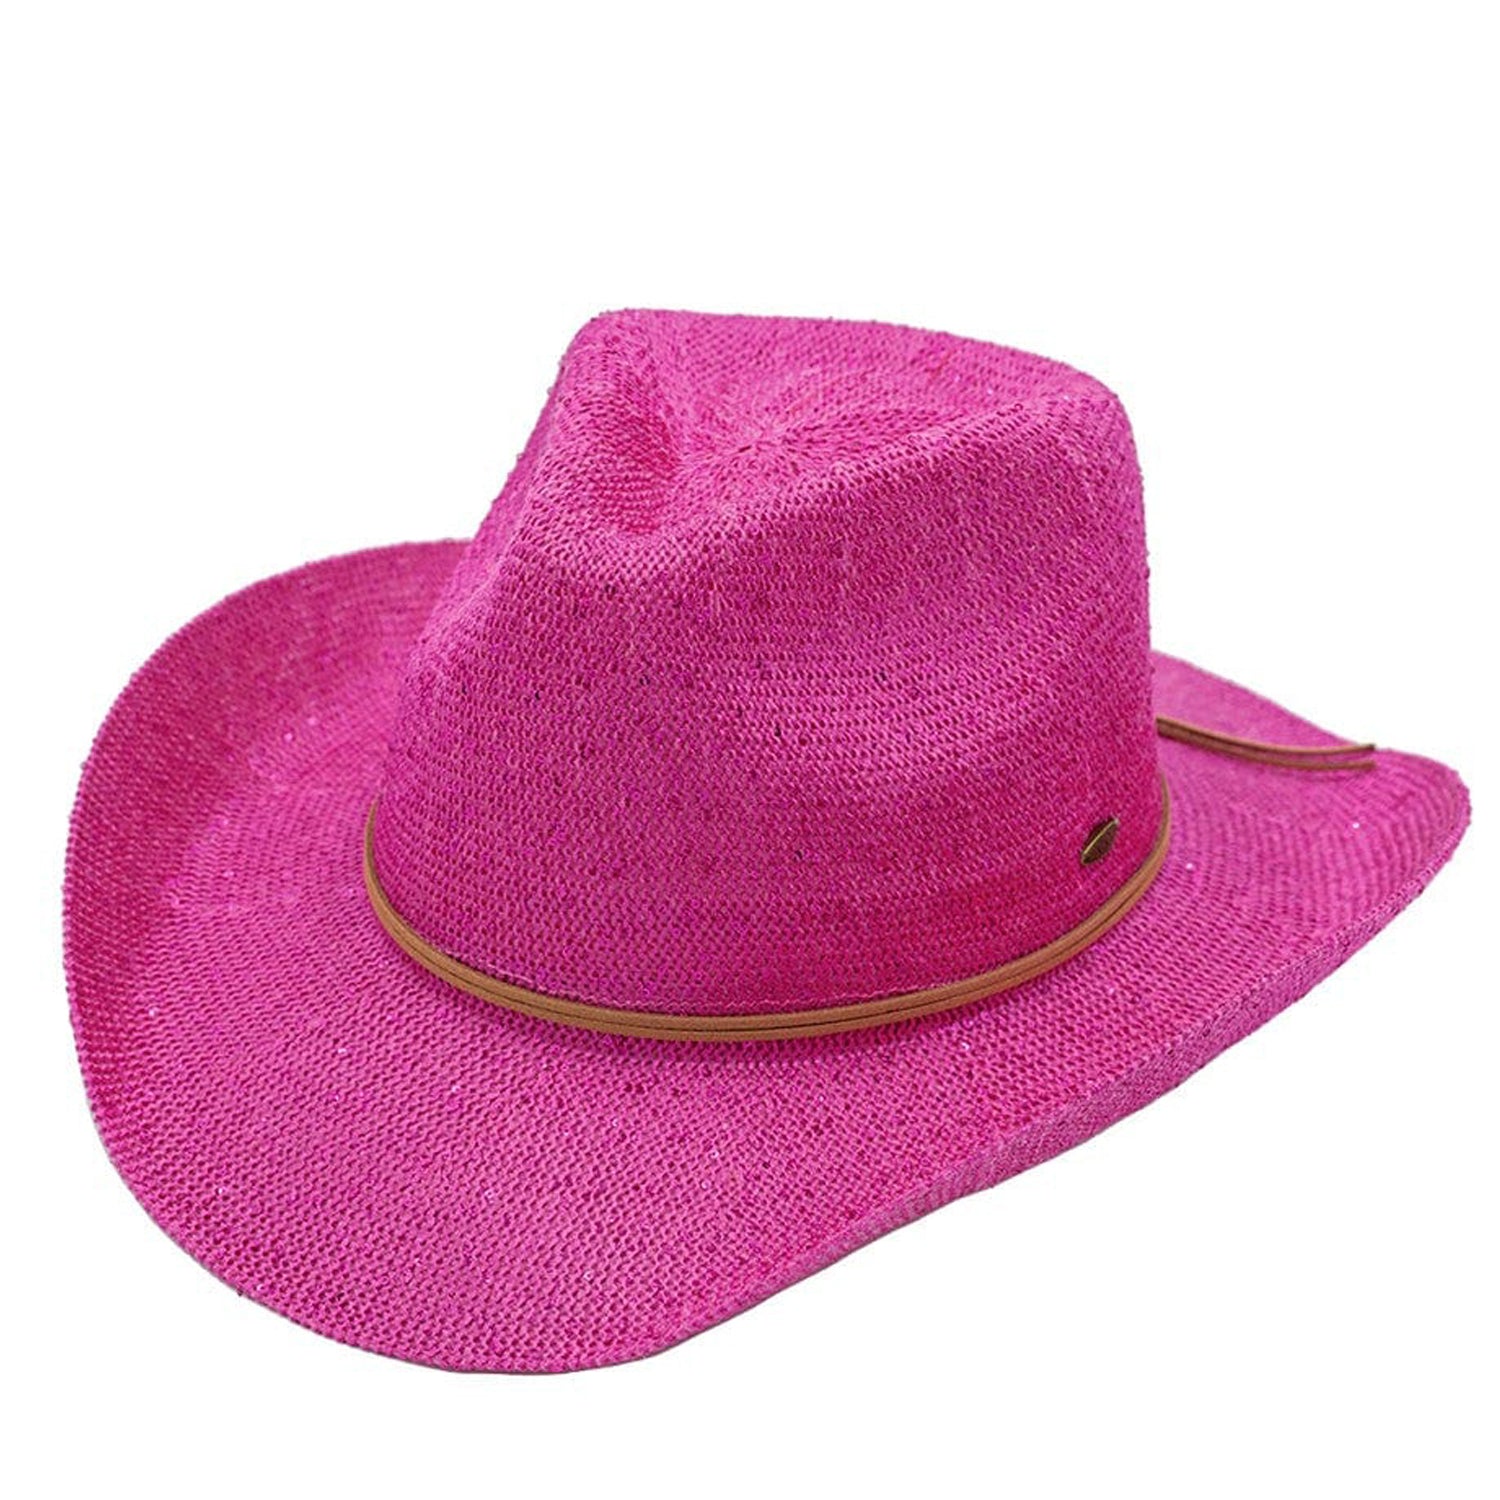 CBC-03 Cowgirl Hat with Glitter Hot Pink